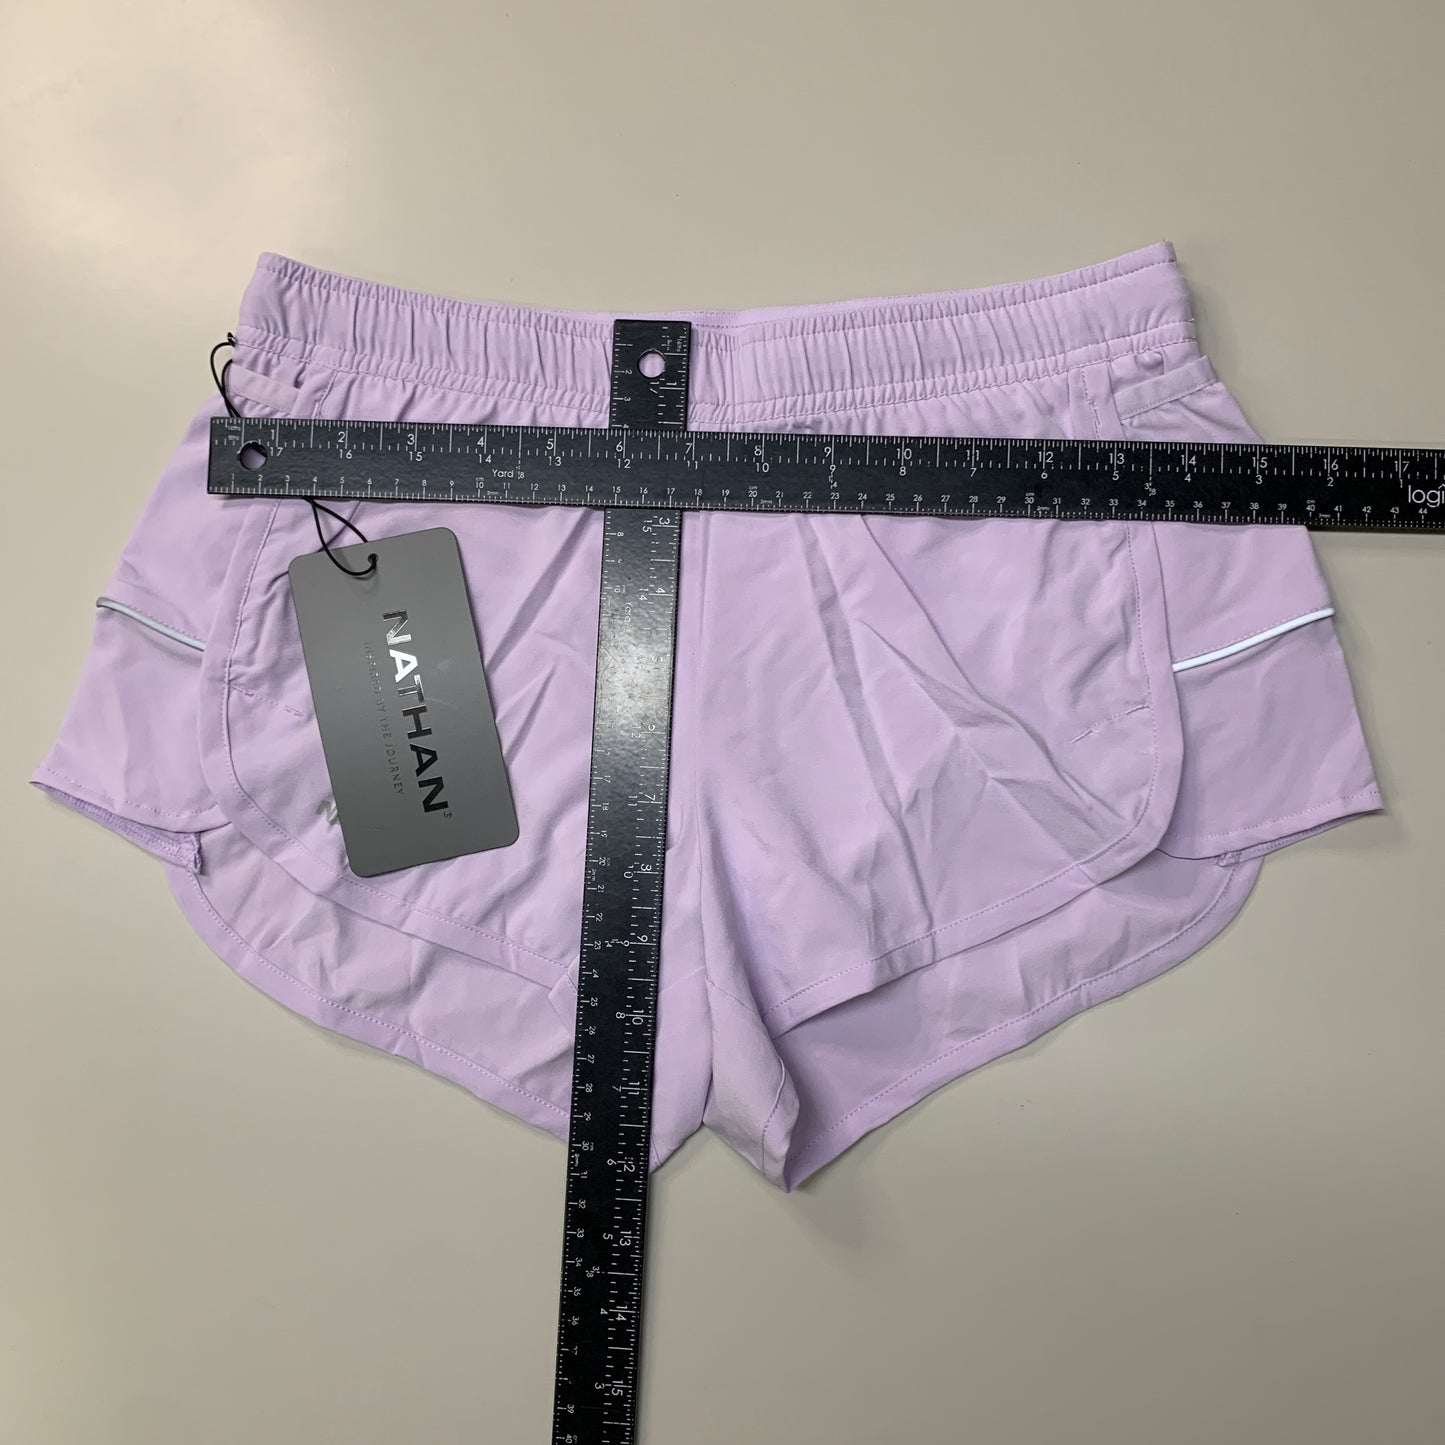 NATHAN Essential Short 2.0 Women's Lilac Breeze Size XS NS51400-70036-XS